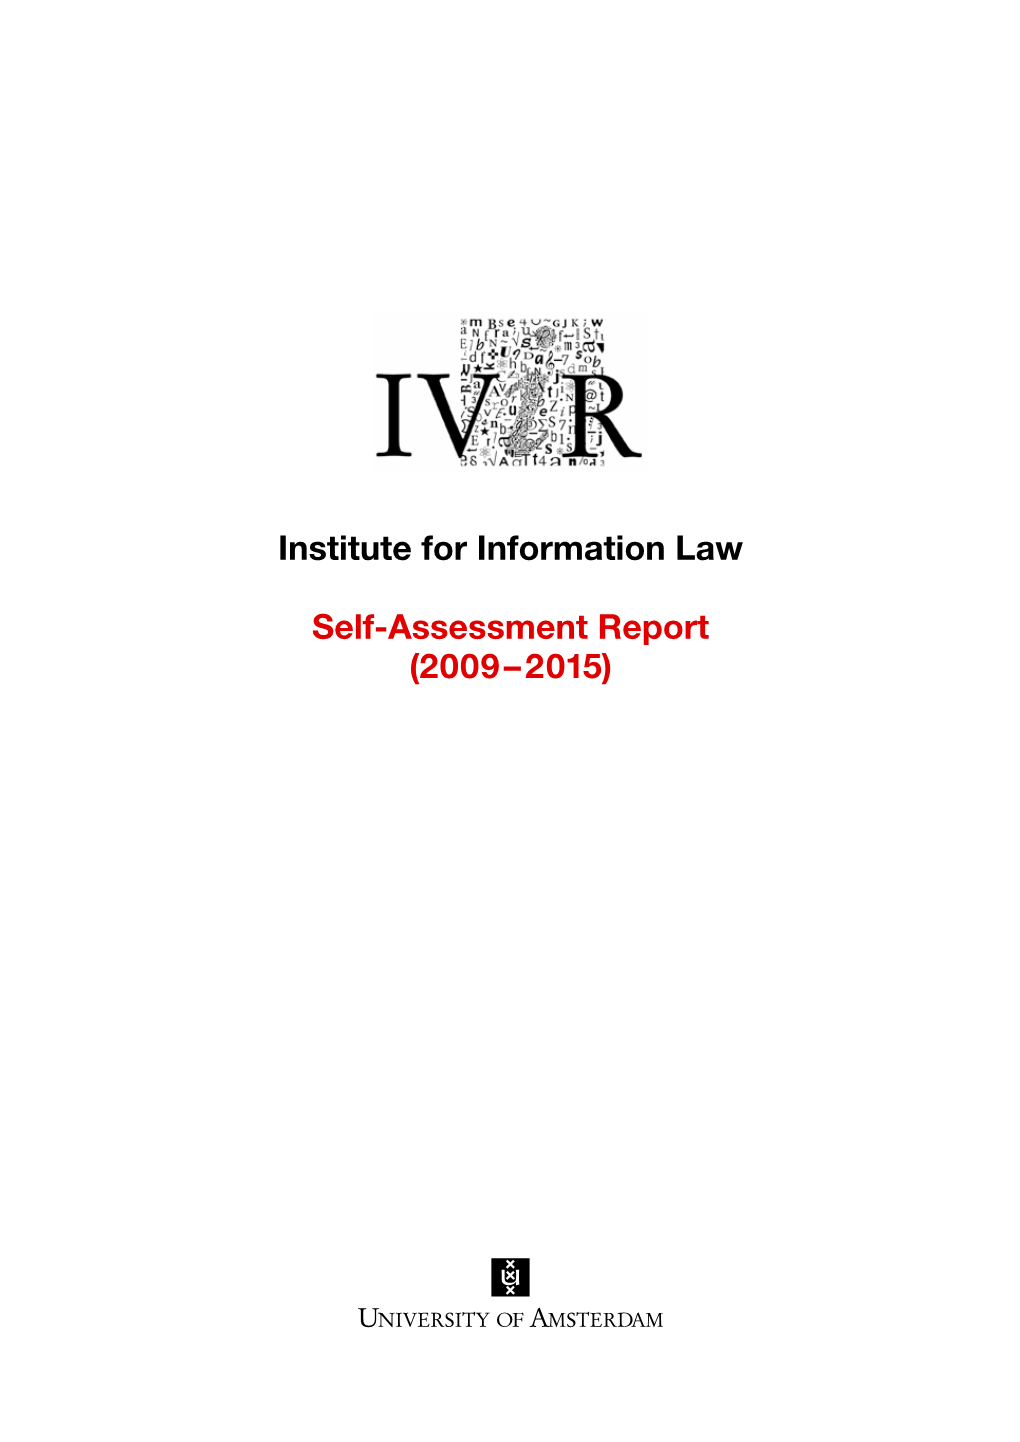 Institute for Information Law Self-Assessment Report (2009–2015)